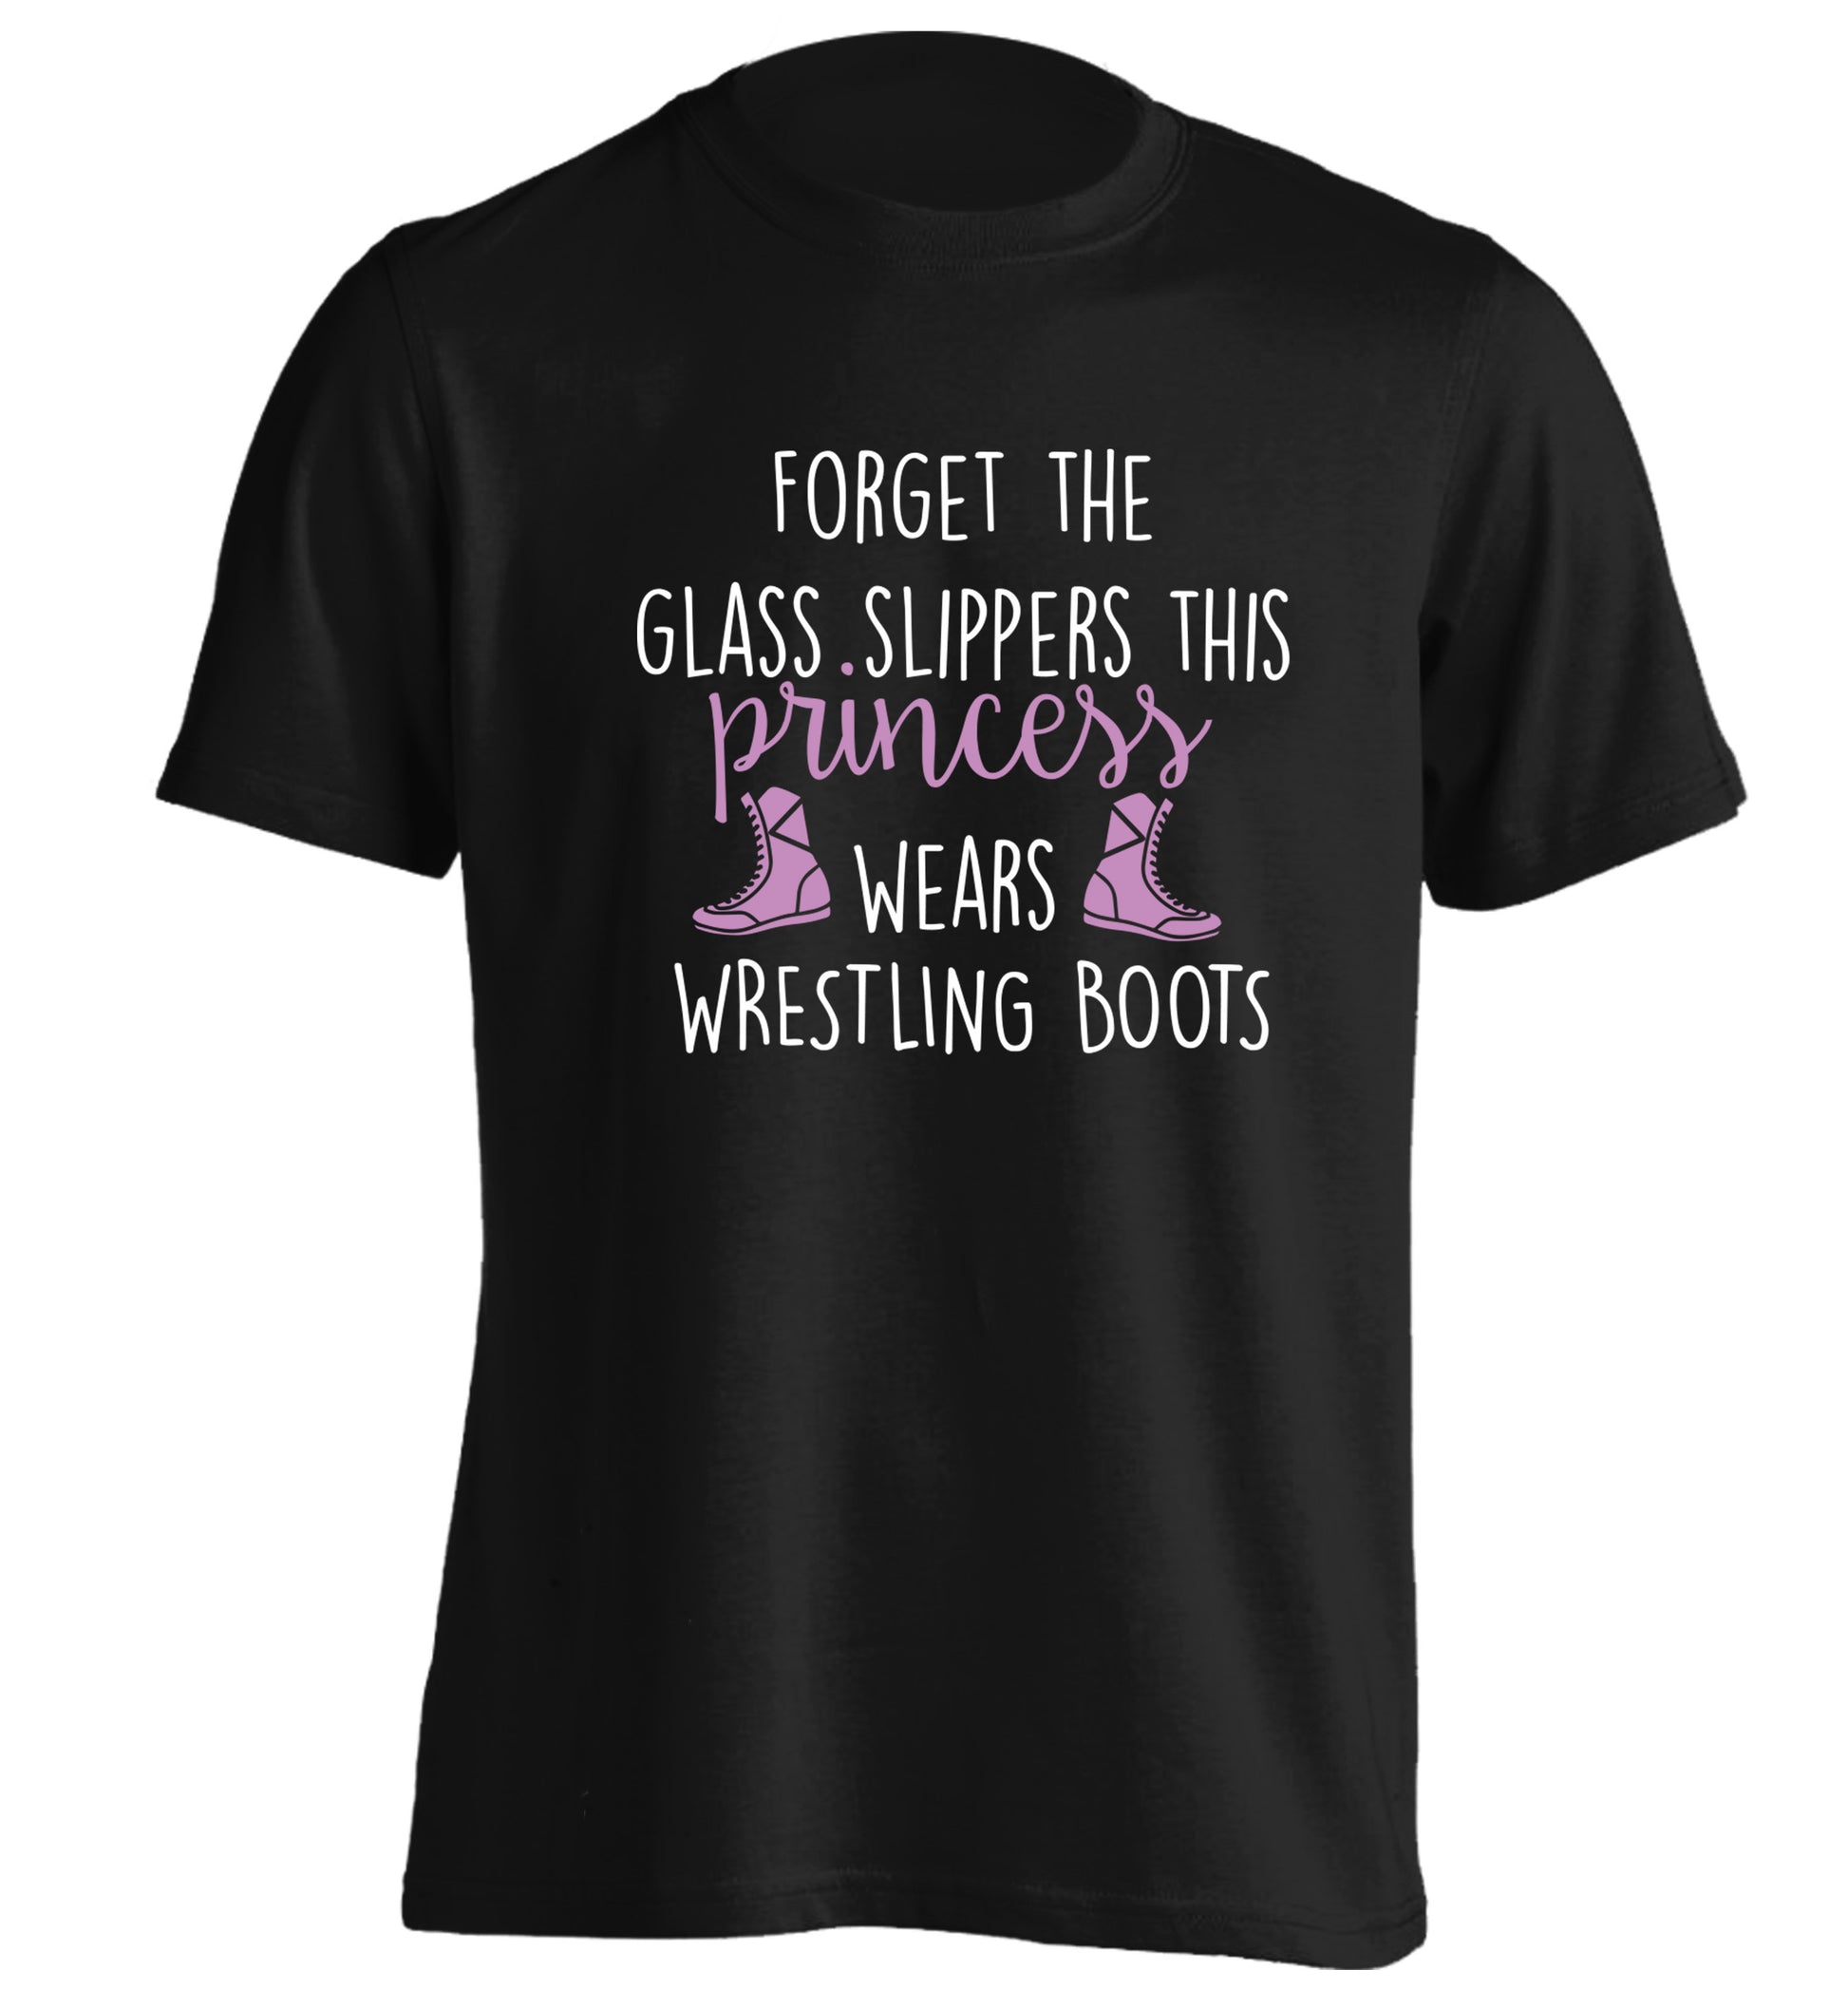 Forget the glass slippers this princess wears wrestling boots adults unisex black Tshirt 2XL